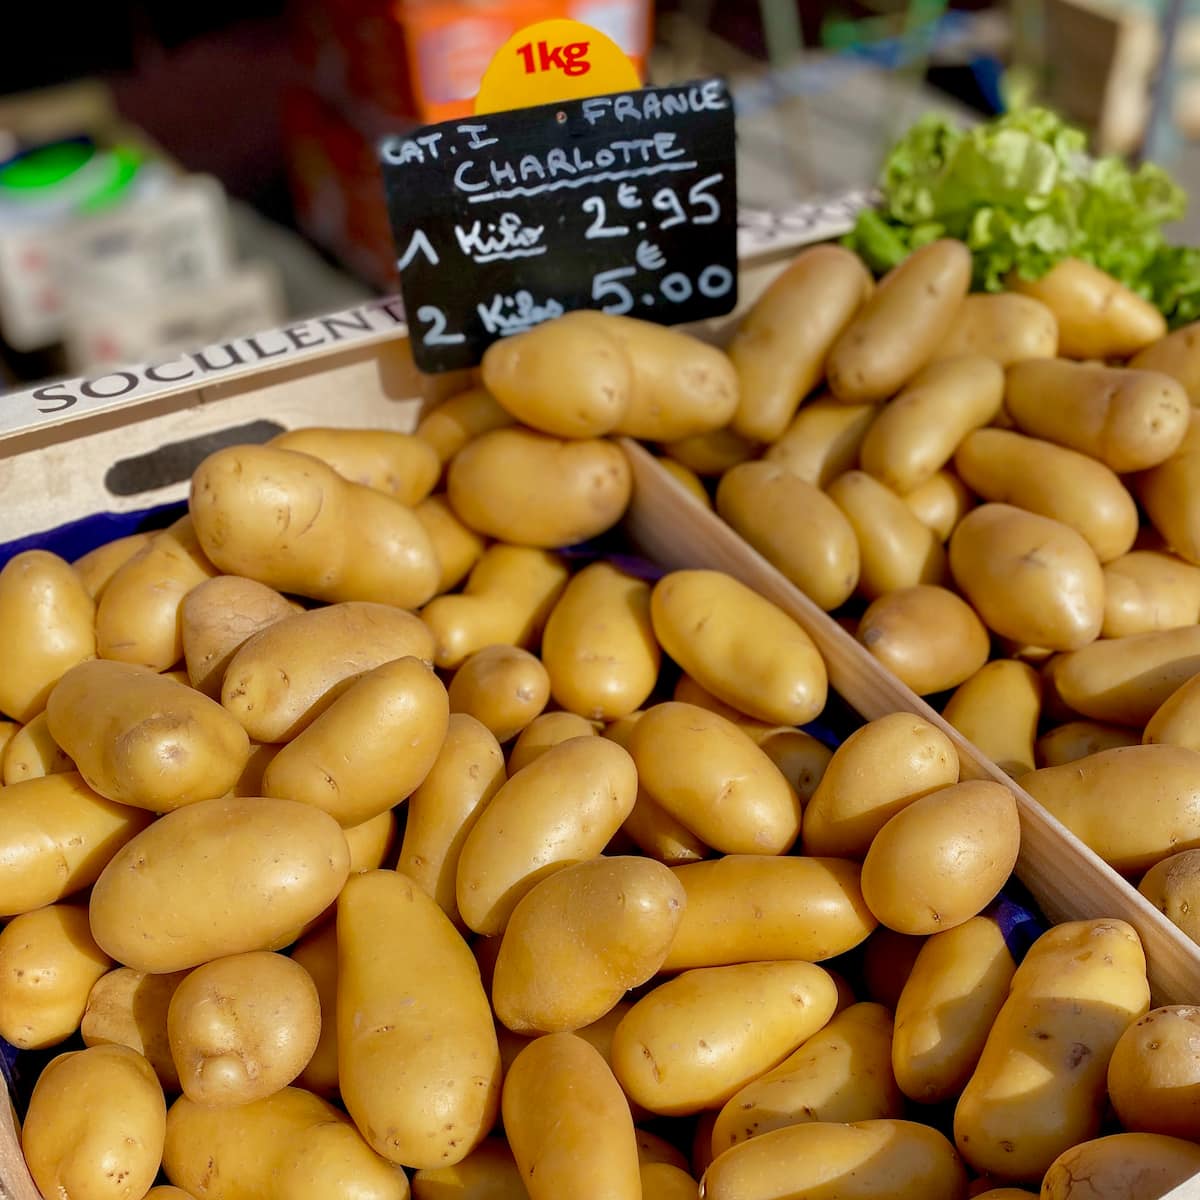 French Charlotte potatoes at the market